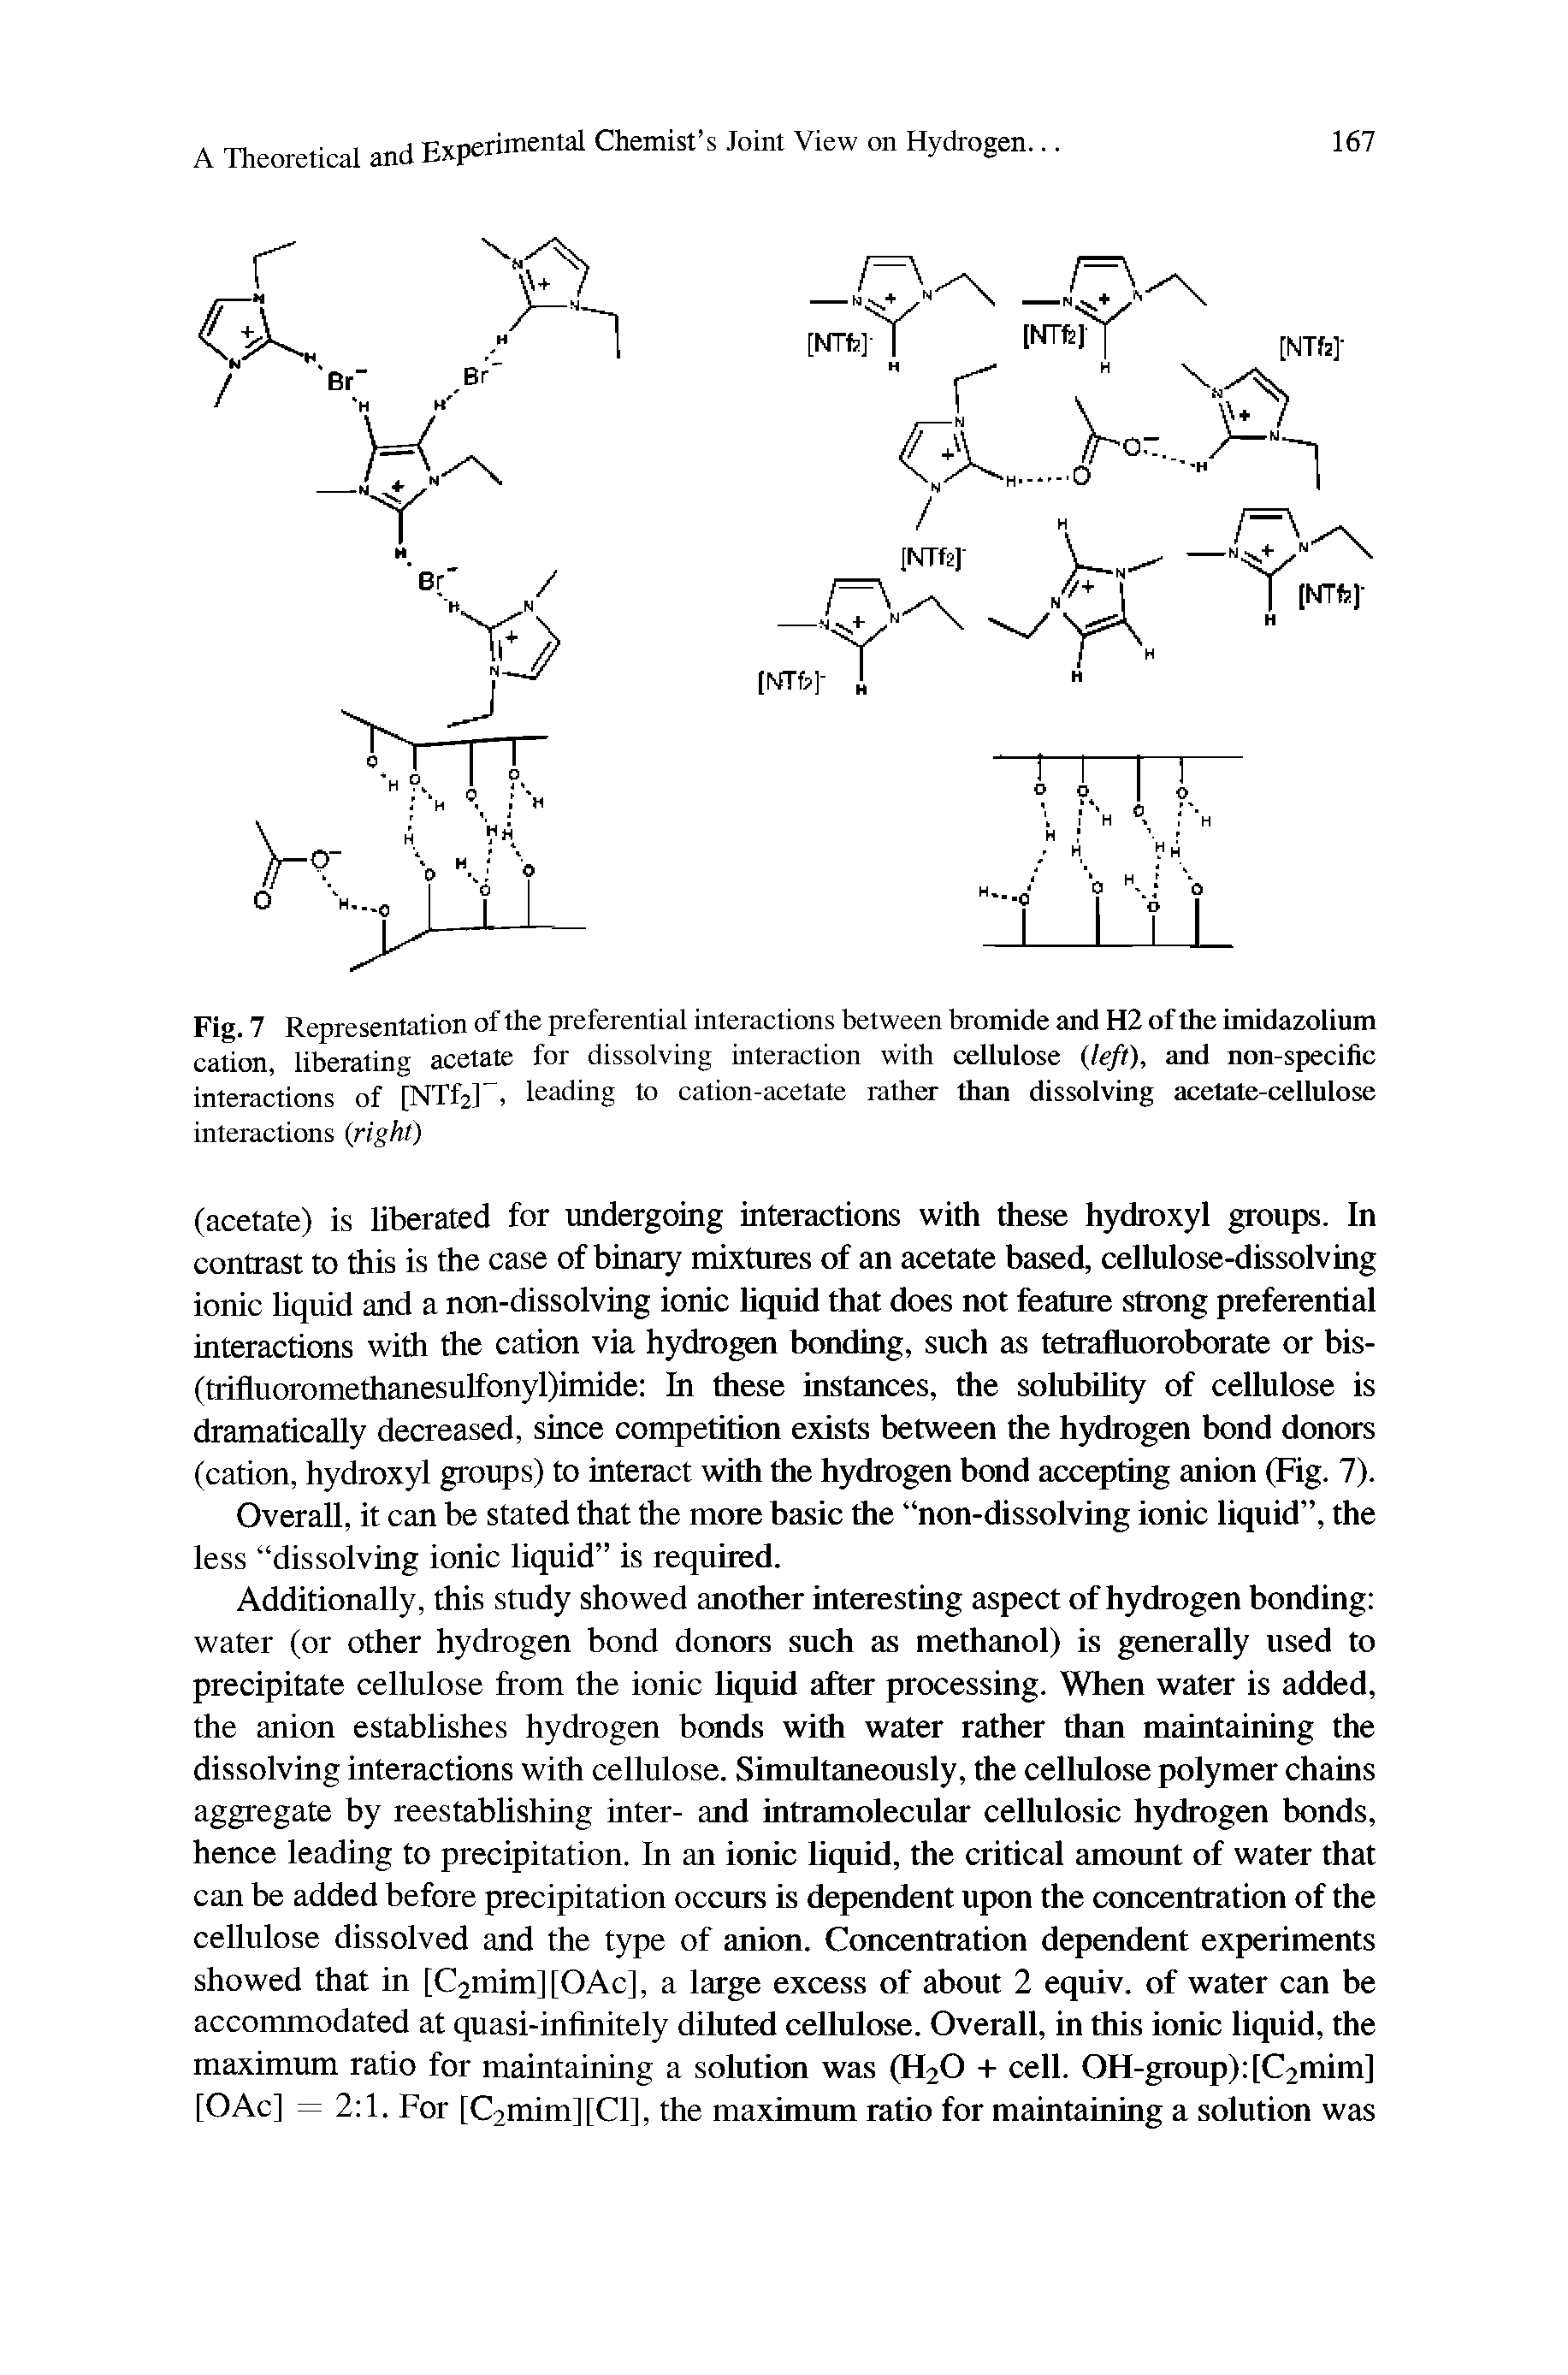 Fig. 7 Representation of the preferential interactions between bromide and H2 of the imidazolium cation, liberating acetate for dissolving interaction with cellulose (left), and non-specific interactions of [NTf2] , leading to cation-acetate rather than dissolving acetate-cellulose interactions (right)...